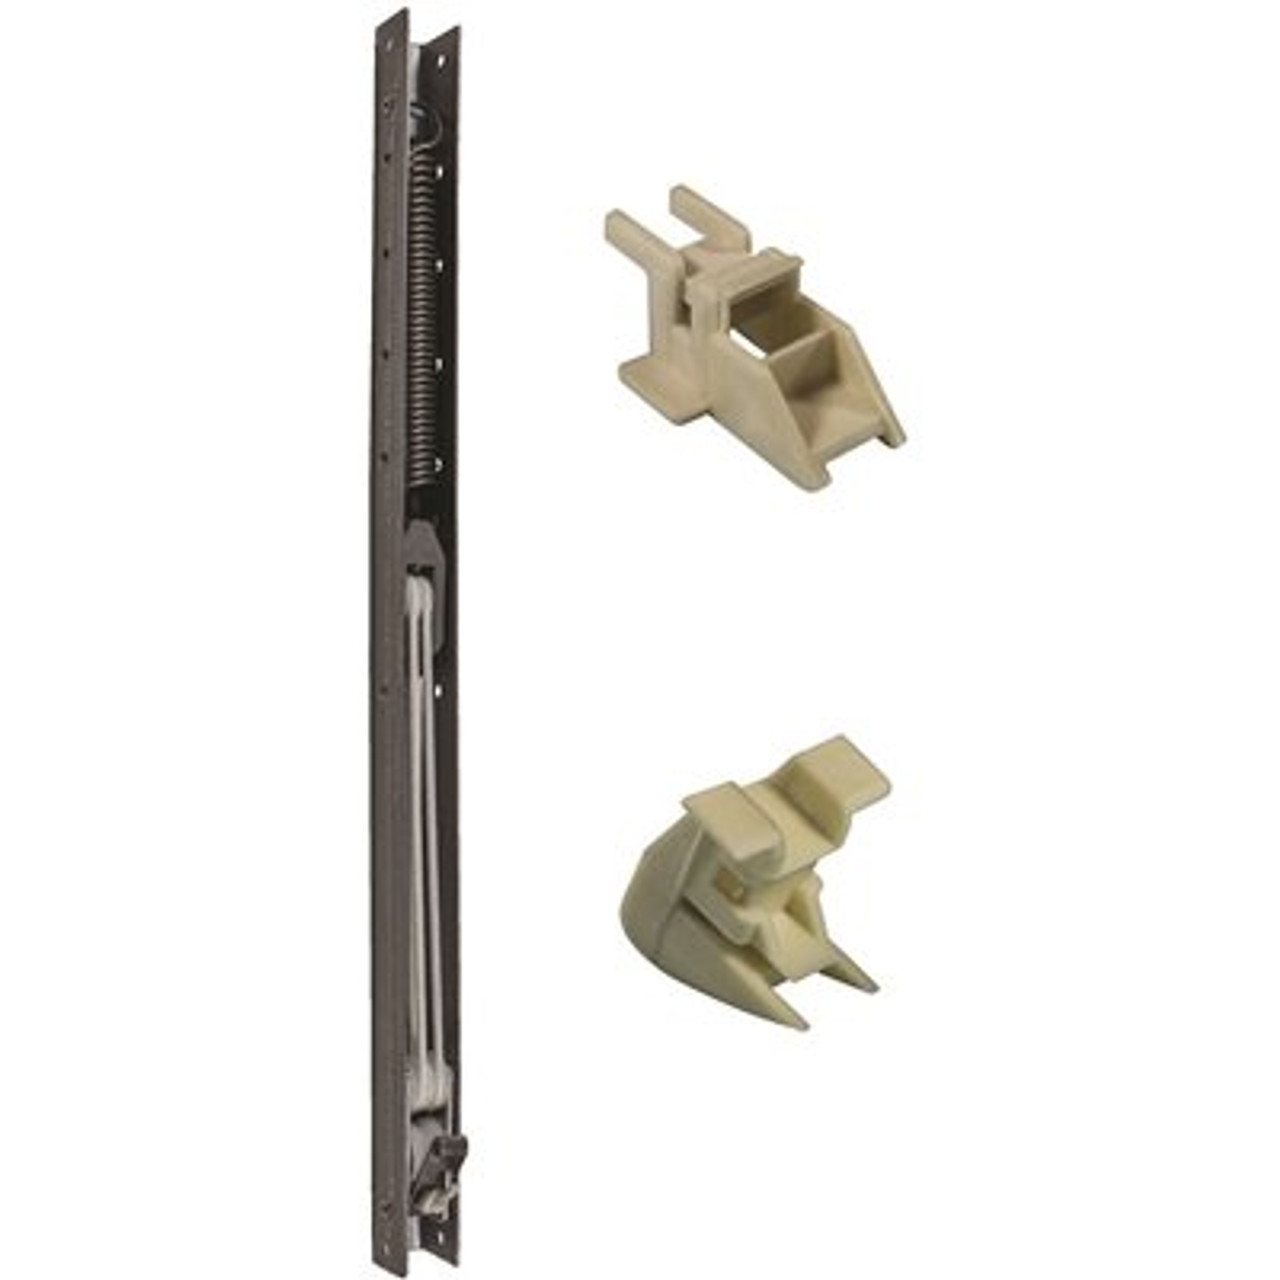 19 In. L Window Channel Balance 1820 With 9/16 In. W X 5/8 In. D Top And Bottom End Brackets Attached - 314413264